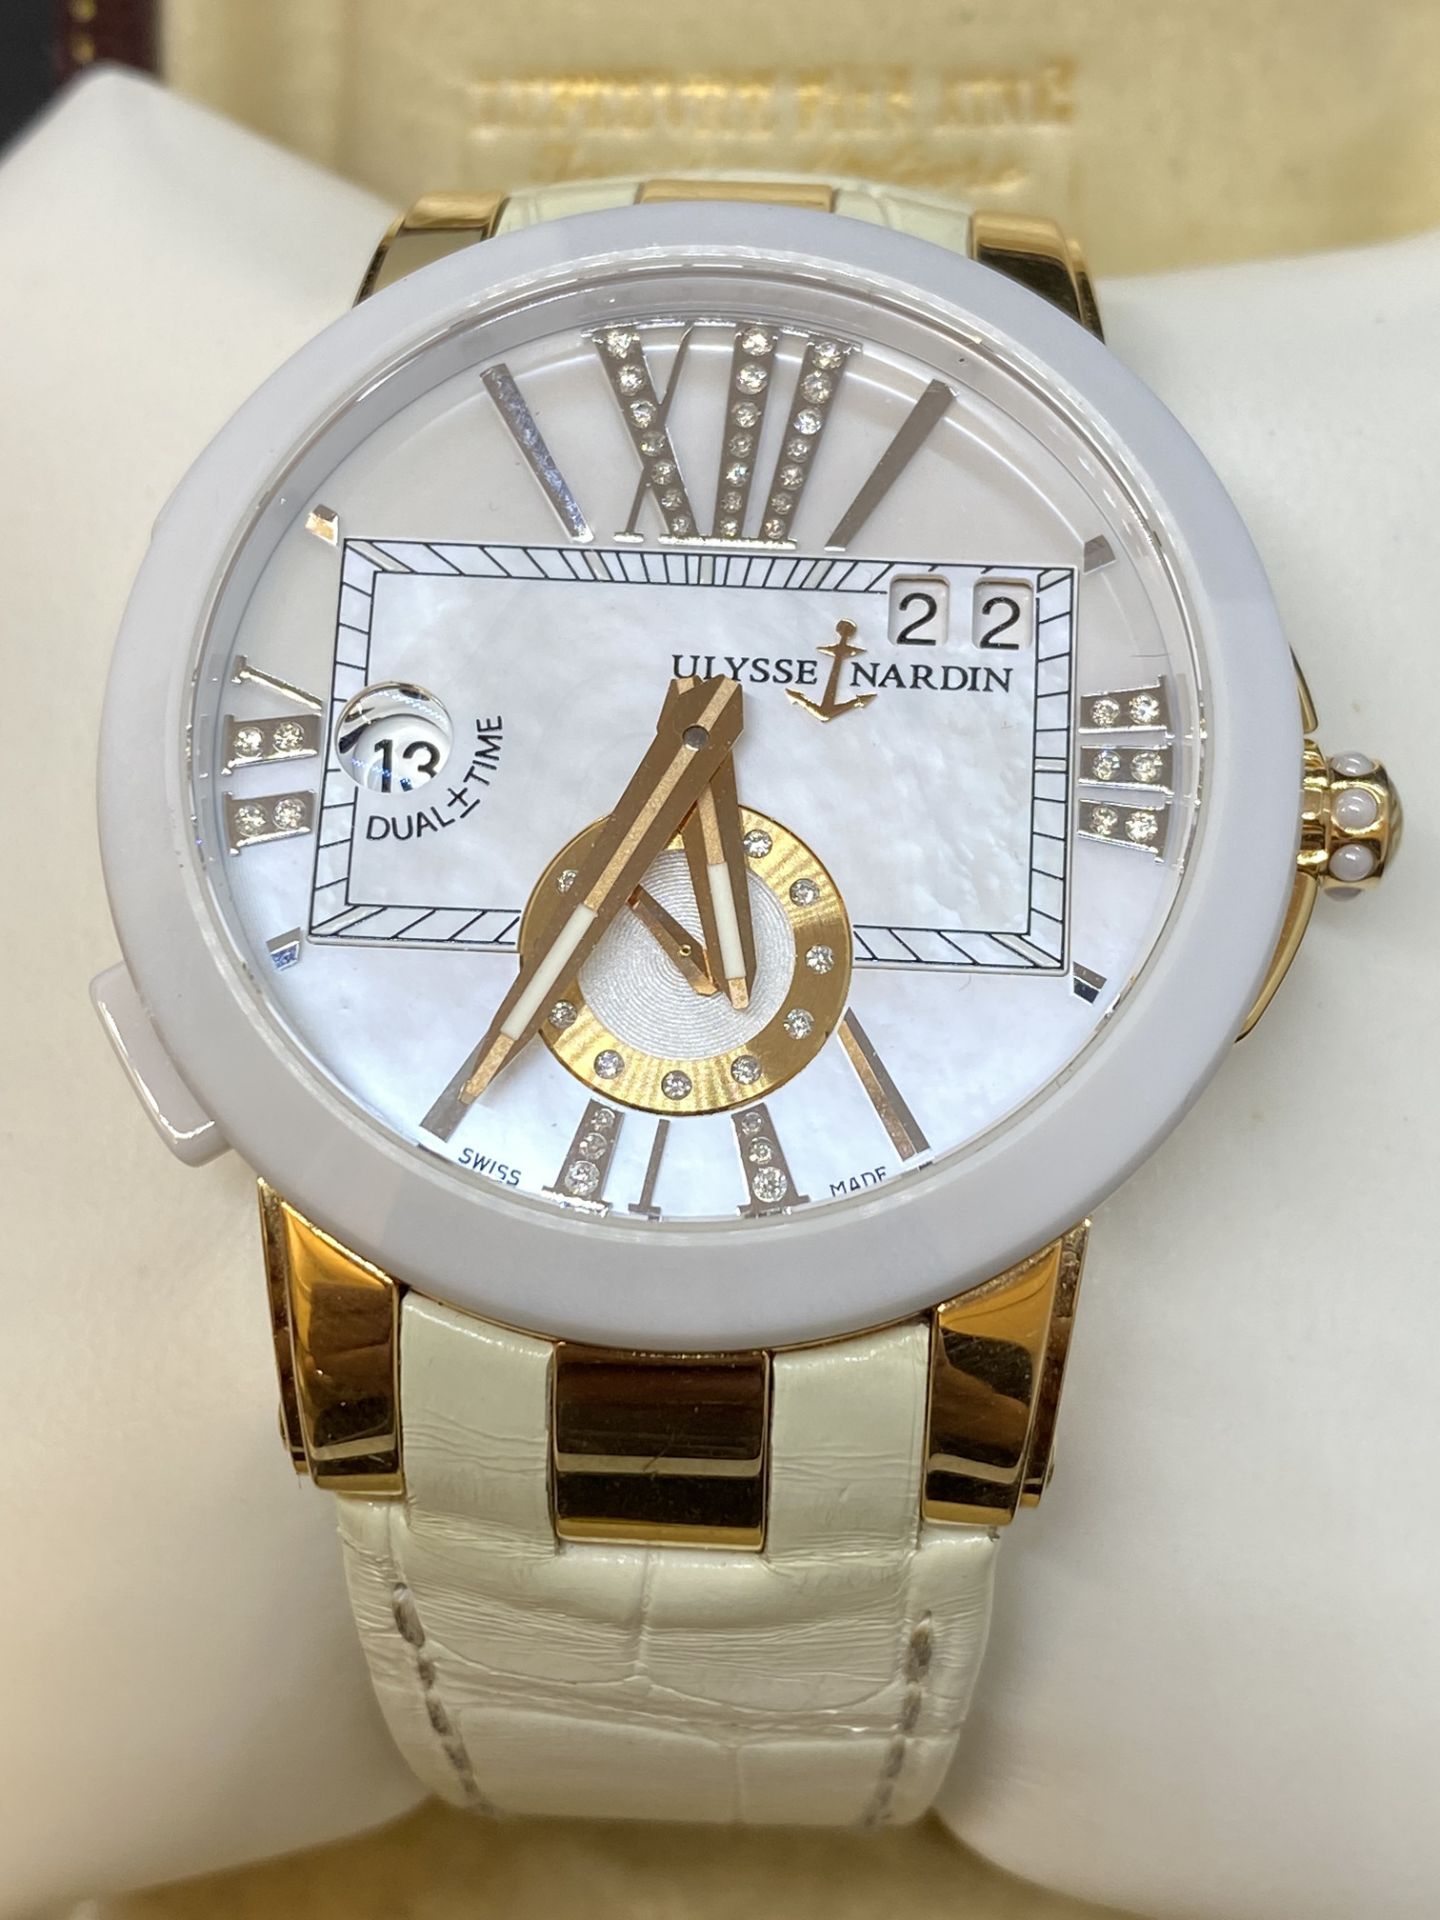 ULYSEE NARDIN 246-10 18ct GOLD DIAMOND LADIES DUAL TIME WATCH - WITH PAPERS - Image 3 of 17